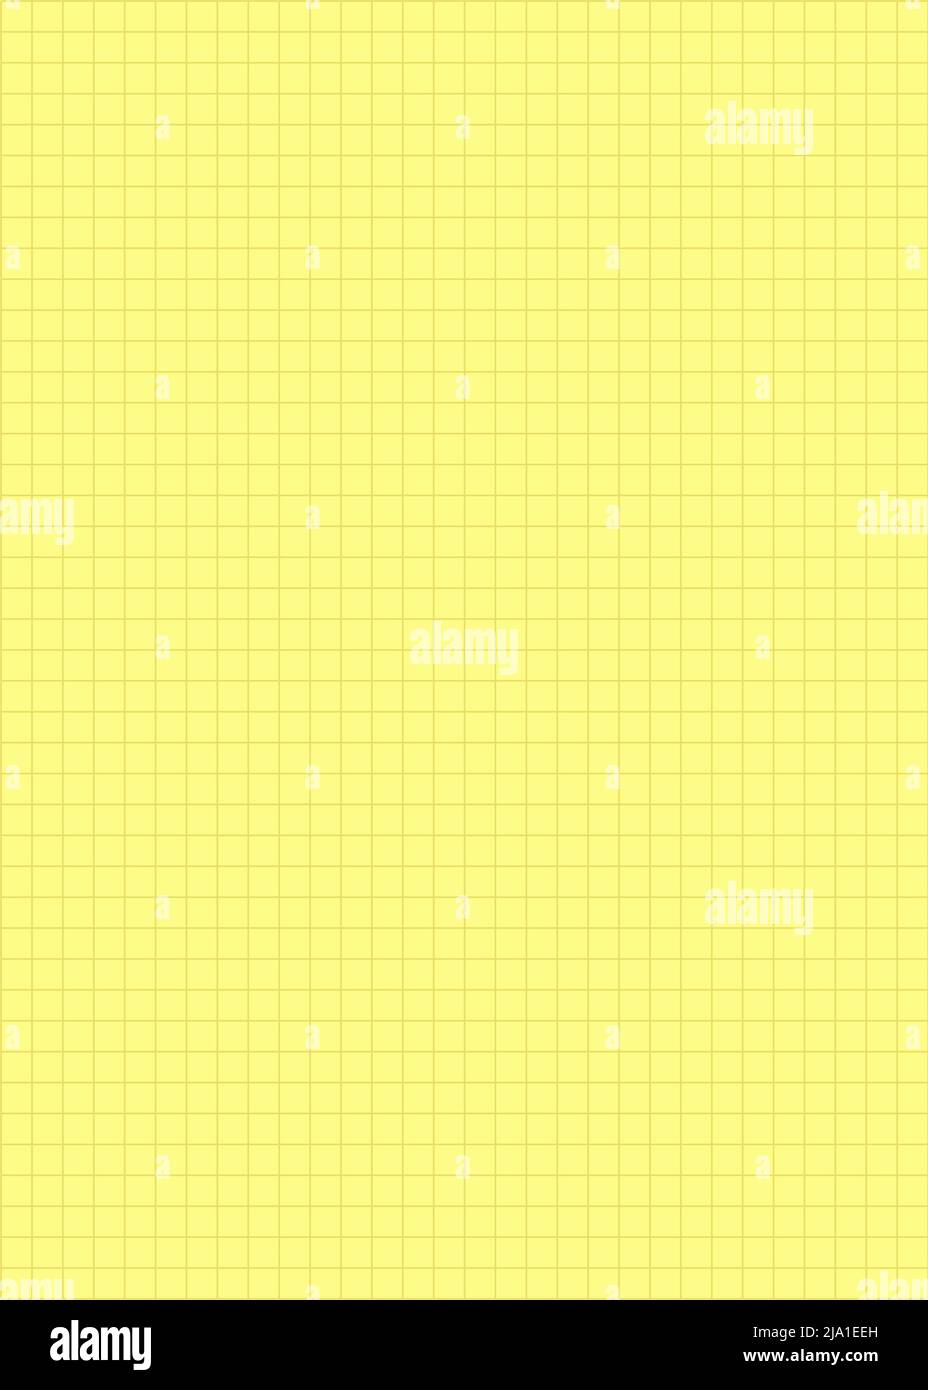 Blank notebook sheet with margins and yellow squares For planner, school, print A5 Checkered pattern Papers homework and exercises Vertical editable m Stock Vector